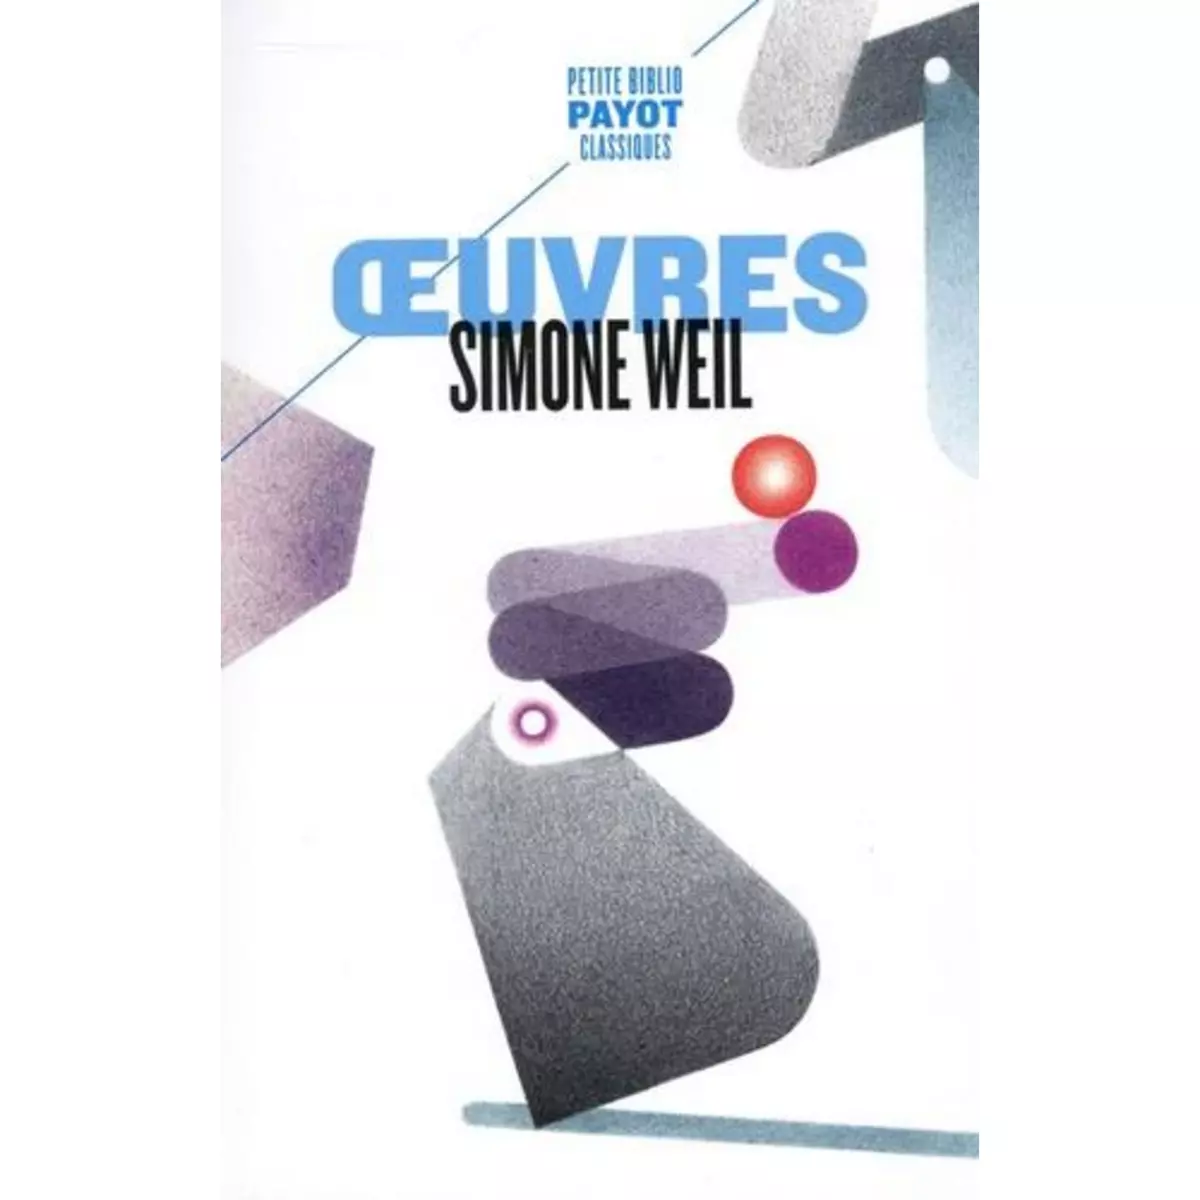  OEUVRES, Weil Simone